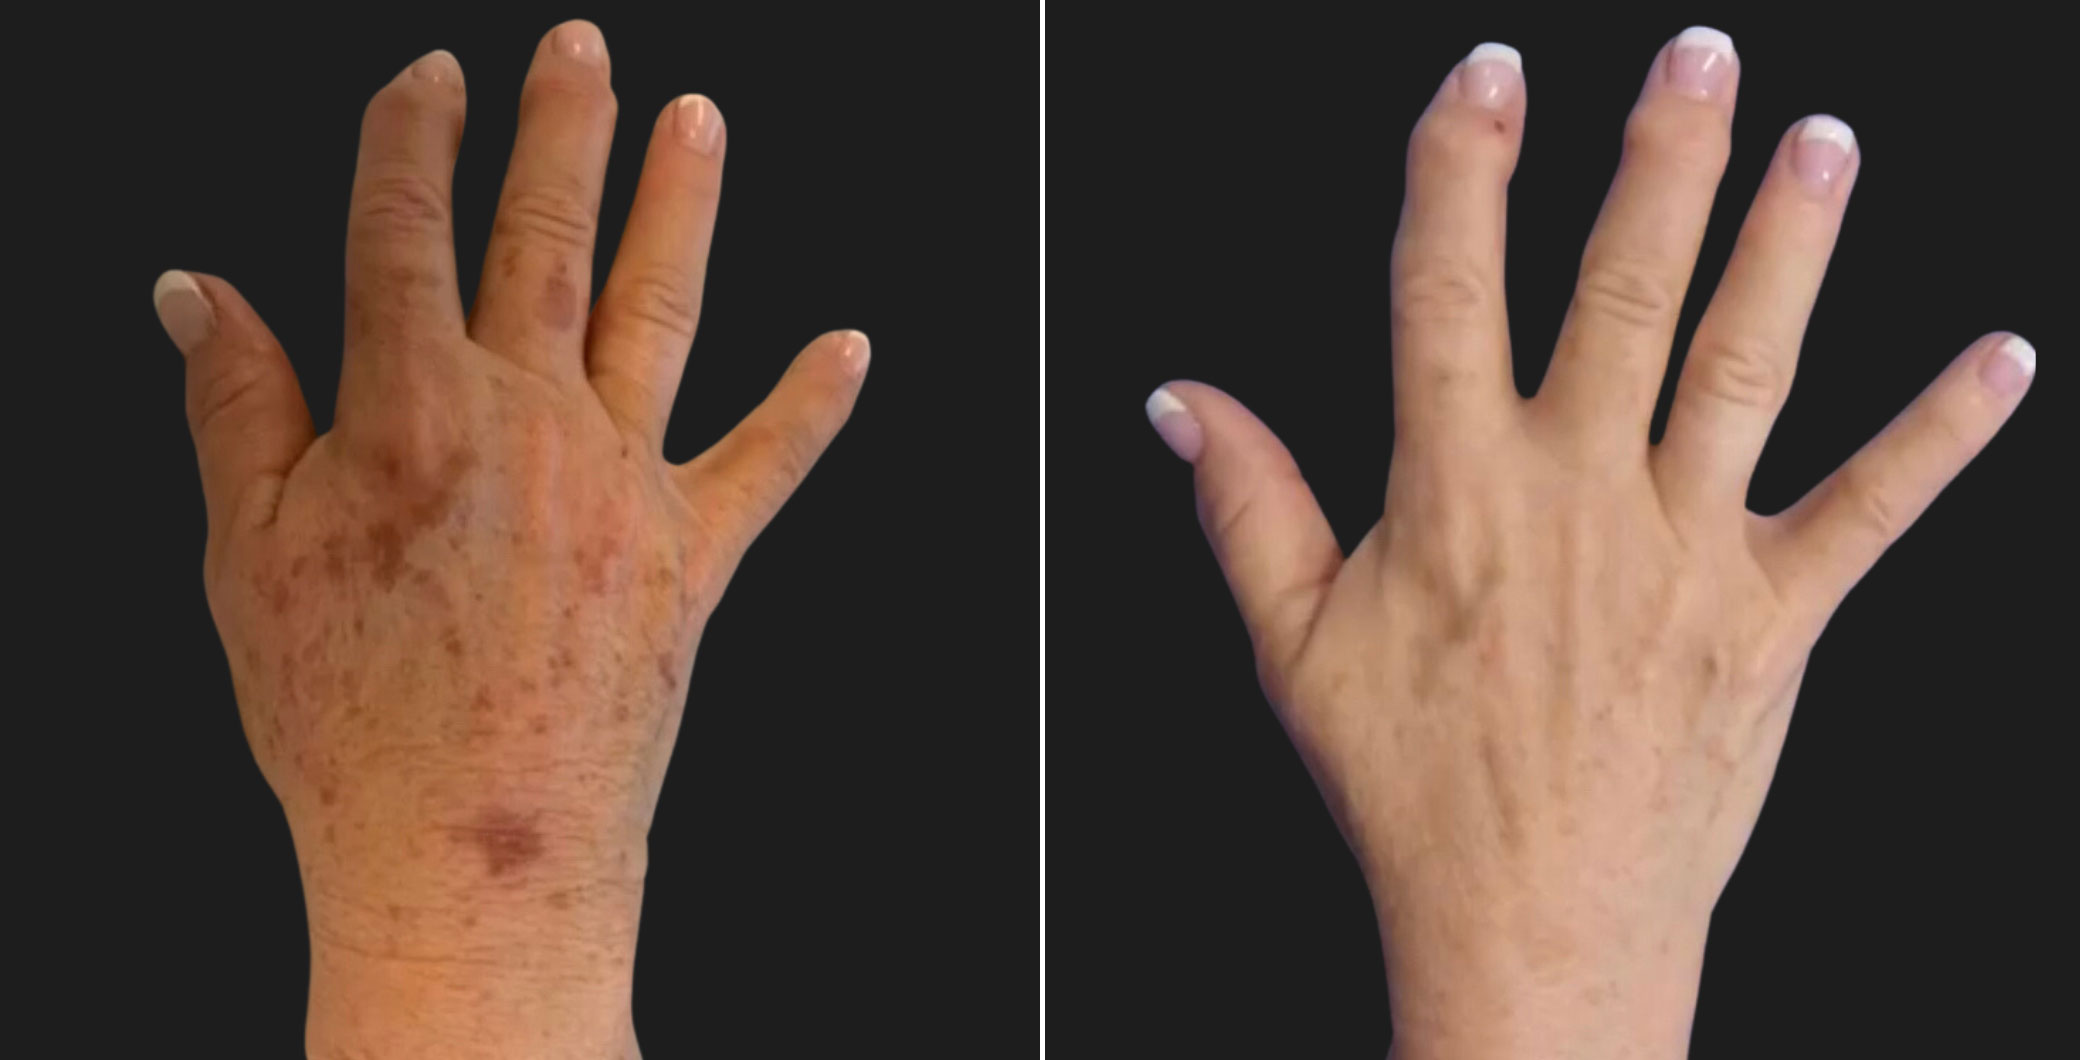 67 year-old before and after 1 session of PicoSure laser on the hands